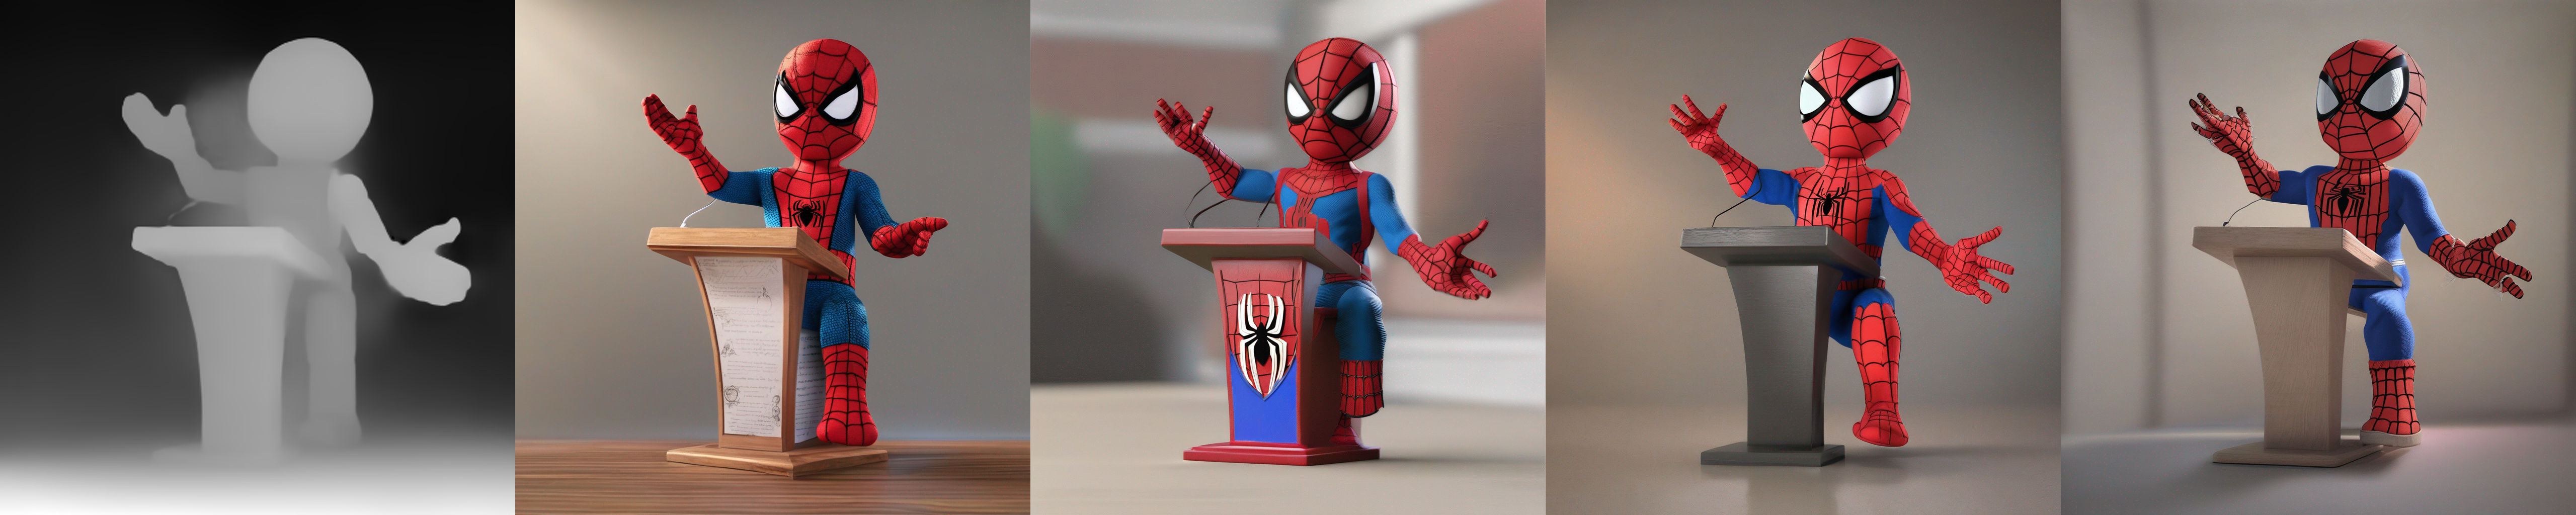 spiderman_mid.png